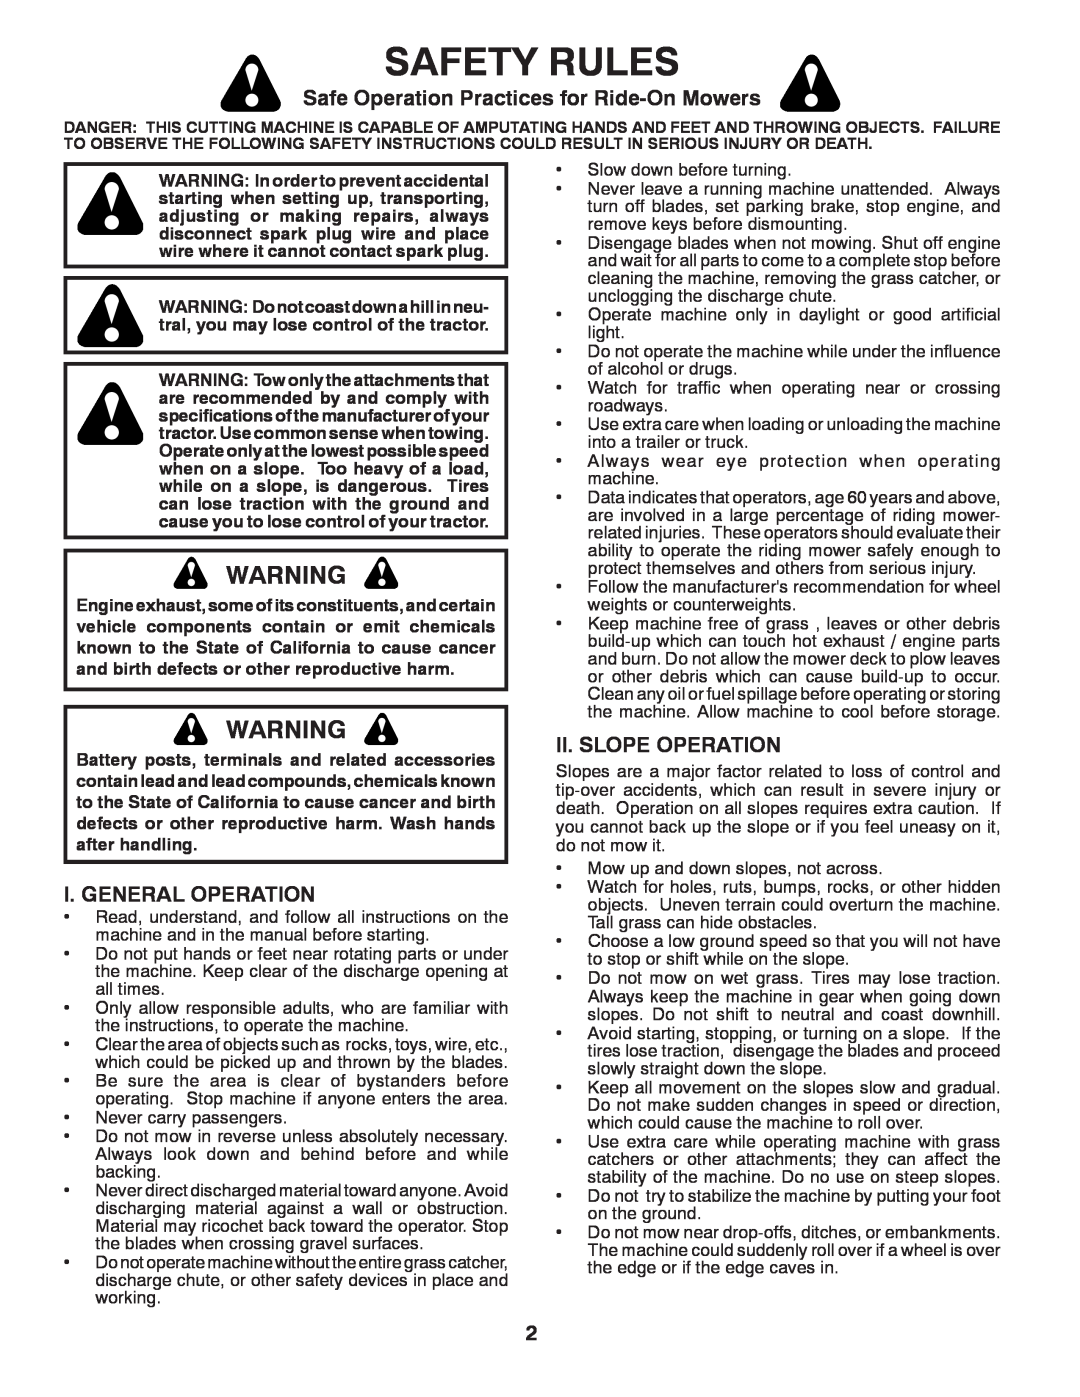 Dixon D26KH54 manual Safety Rules, Safe Operation Practices for Ride-On Mowers, I. General Operation, Ii. Slope Operation 